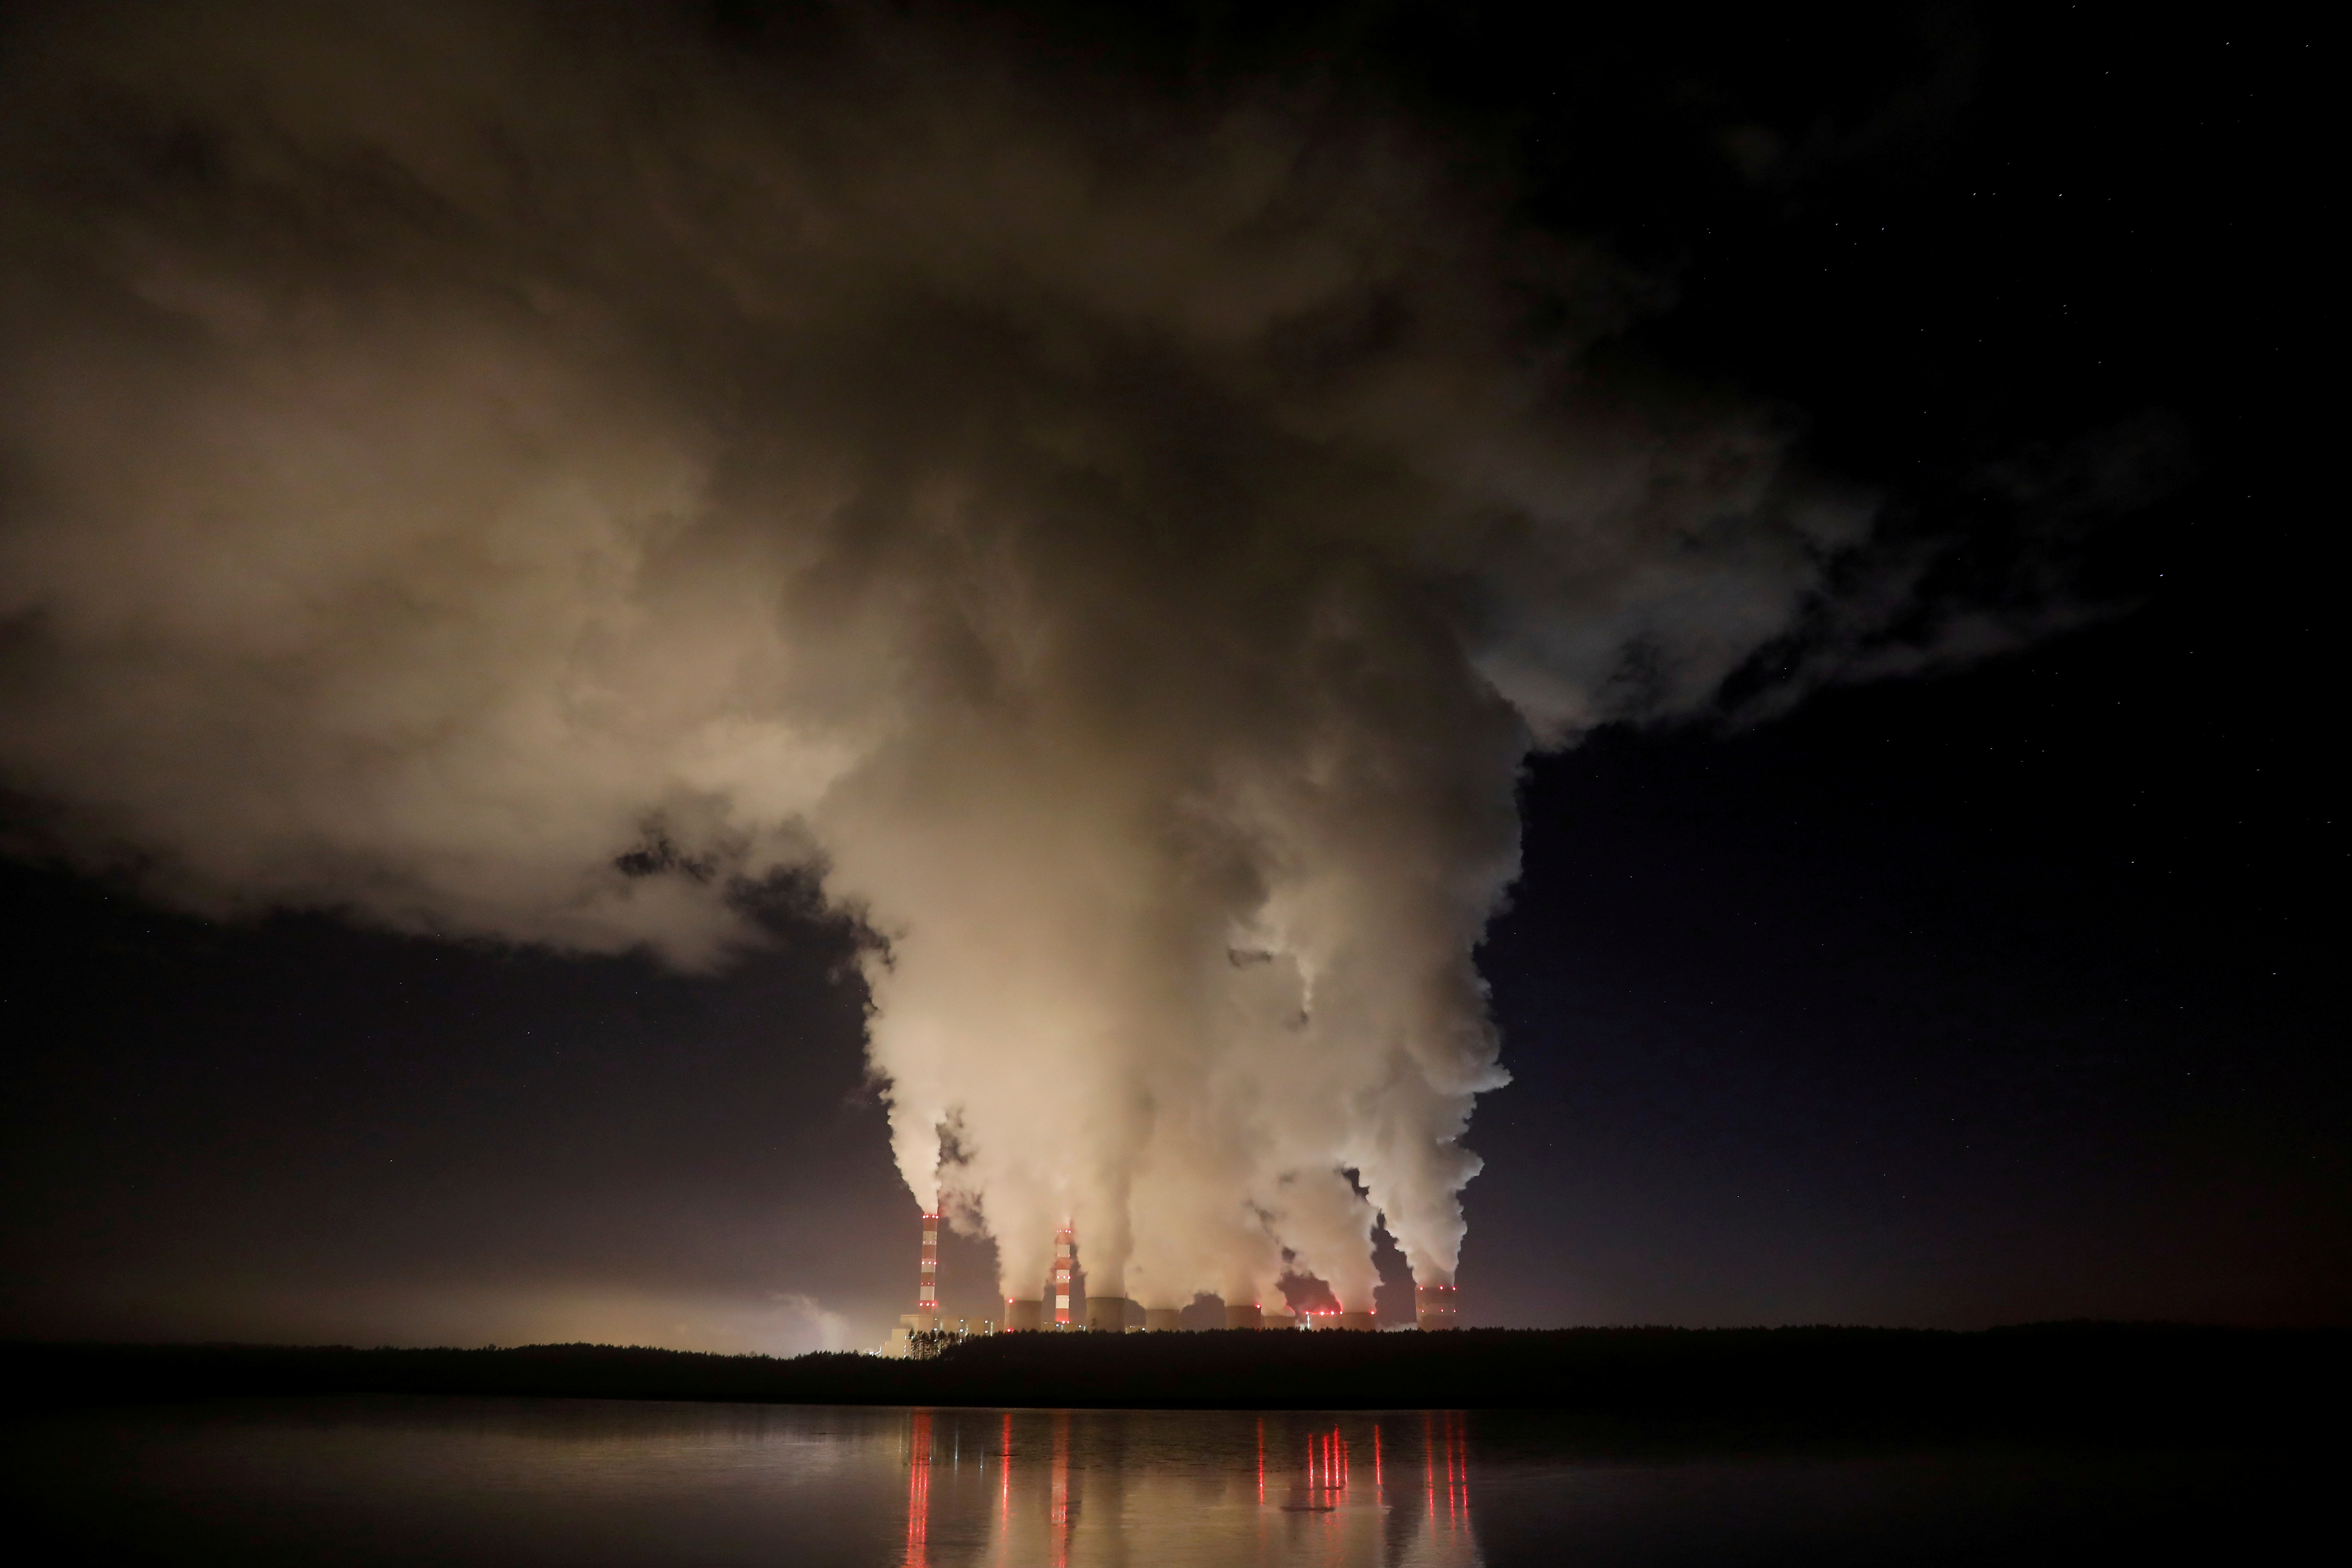 Smoke and steam billow from Belchatow Power Station, Europe's largest coal-fired power plant operated by PGE Group, at night near Belchatow, Poland December 5, 2018.  REUTERS/Kacper Pempel/File Photo/File Photo